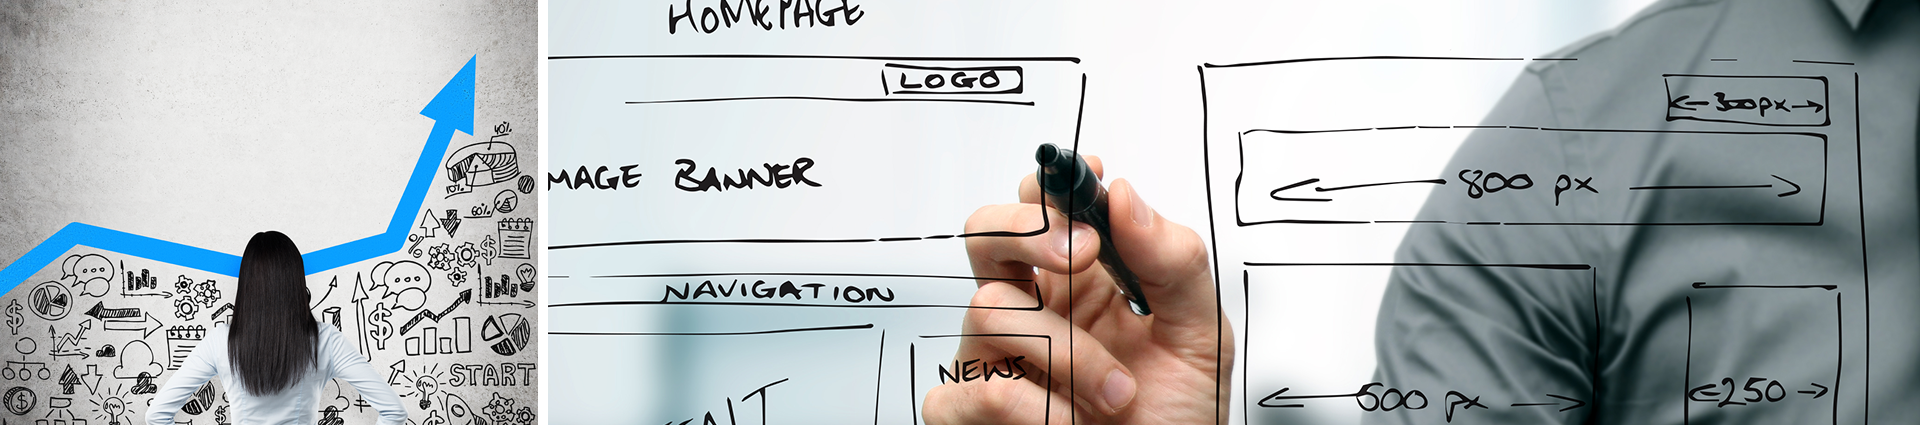 adult looking at marketing icons with up graph bar and a person drawing a website wire frame